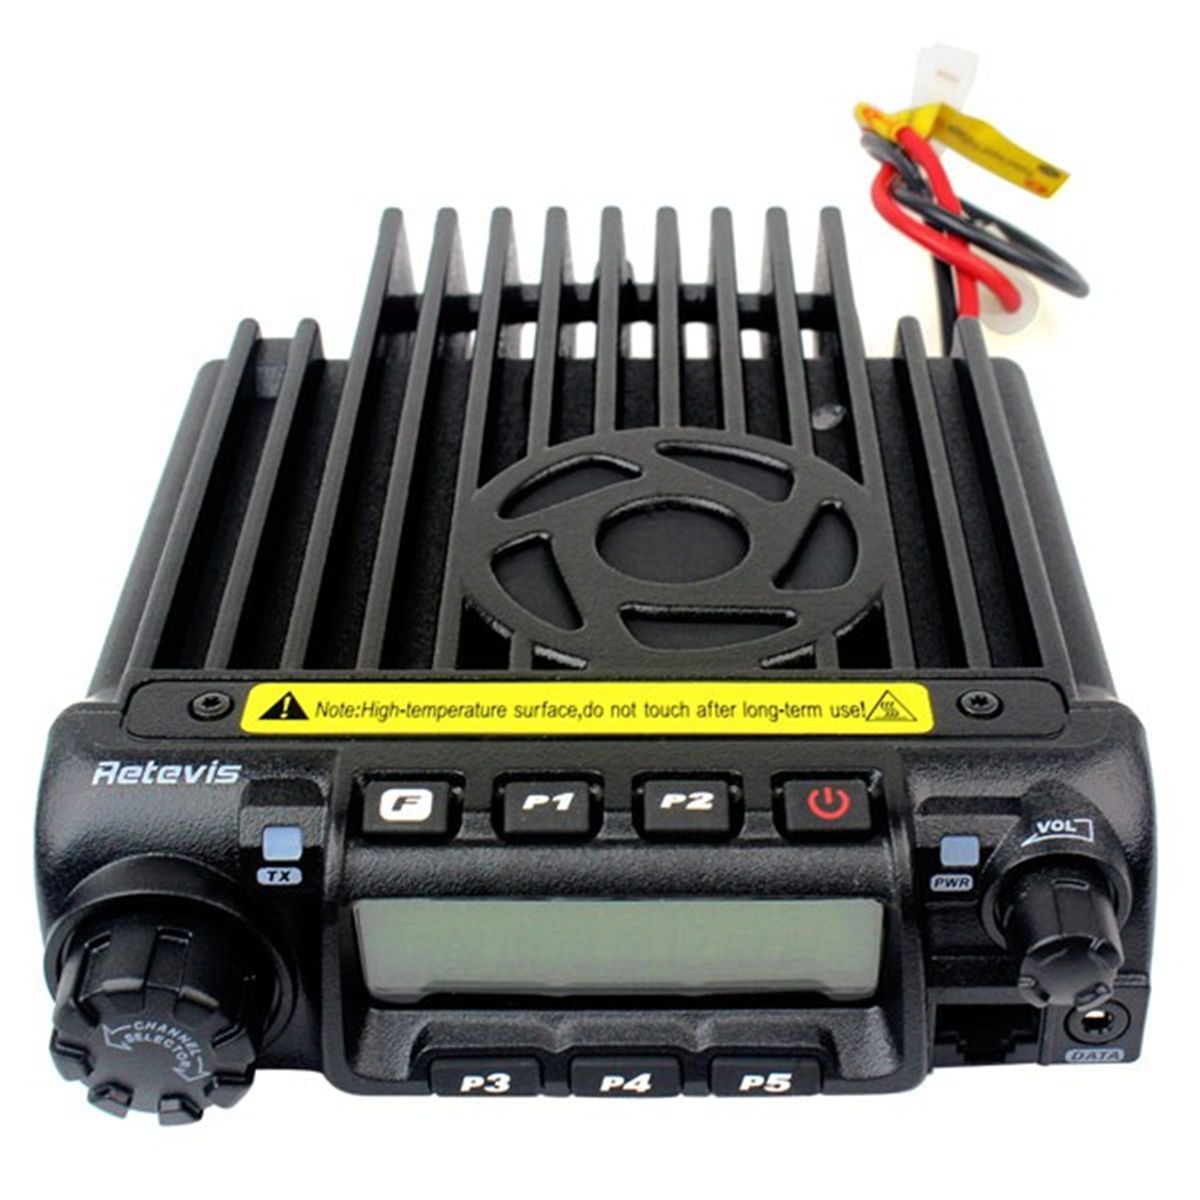 Retevis-RT-9000D-VHF-400-490MHz-Mobile-Car-Radio-Transceiver-200CH-50CTCSS-60W-1490220